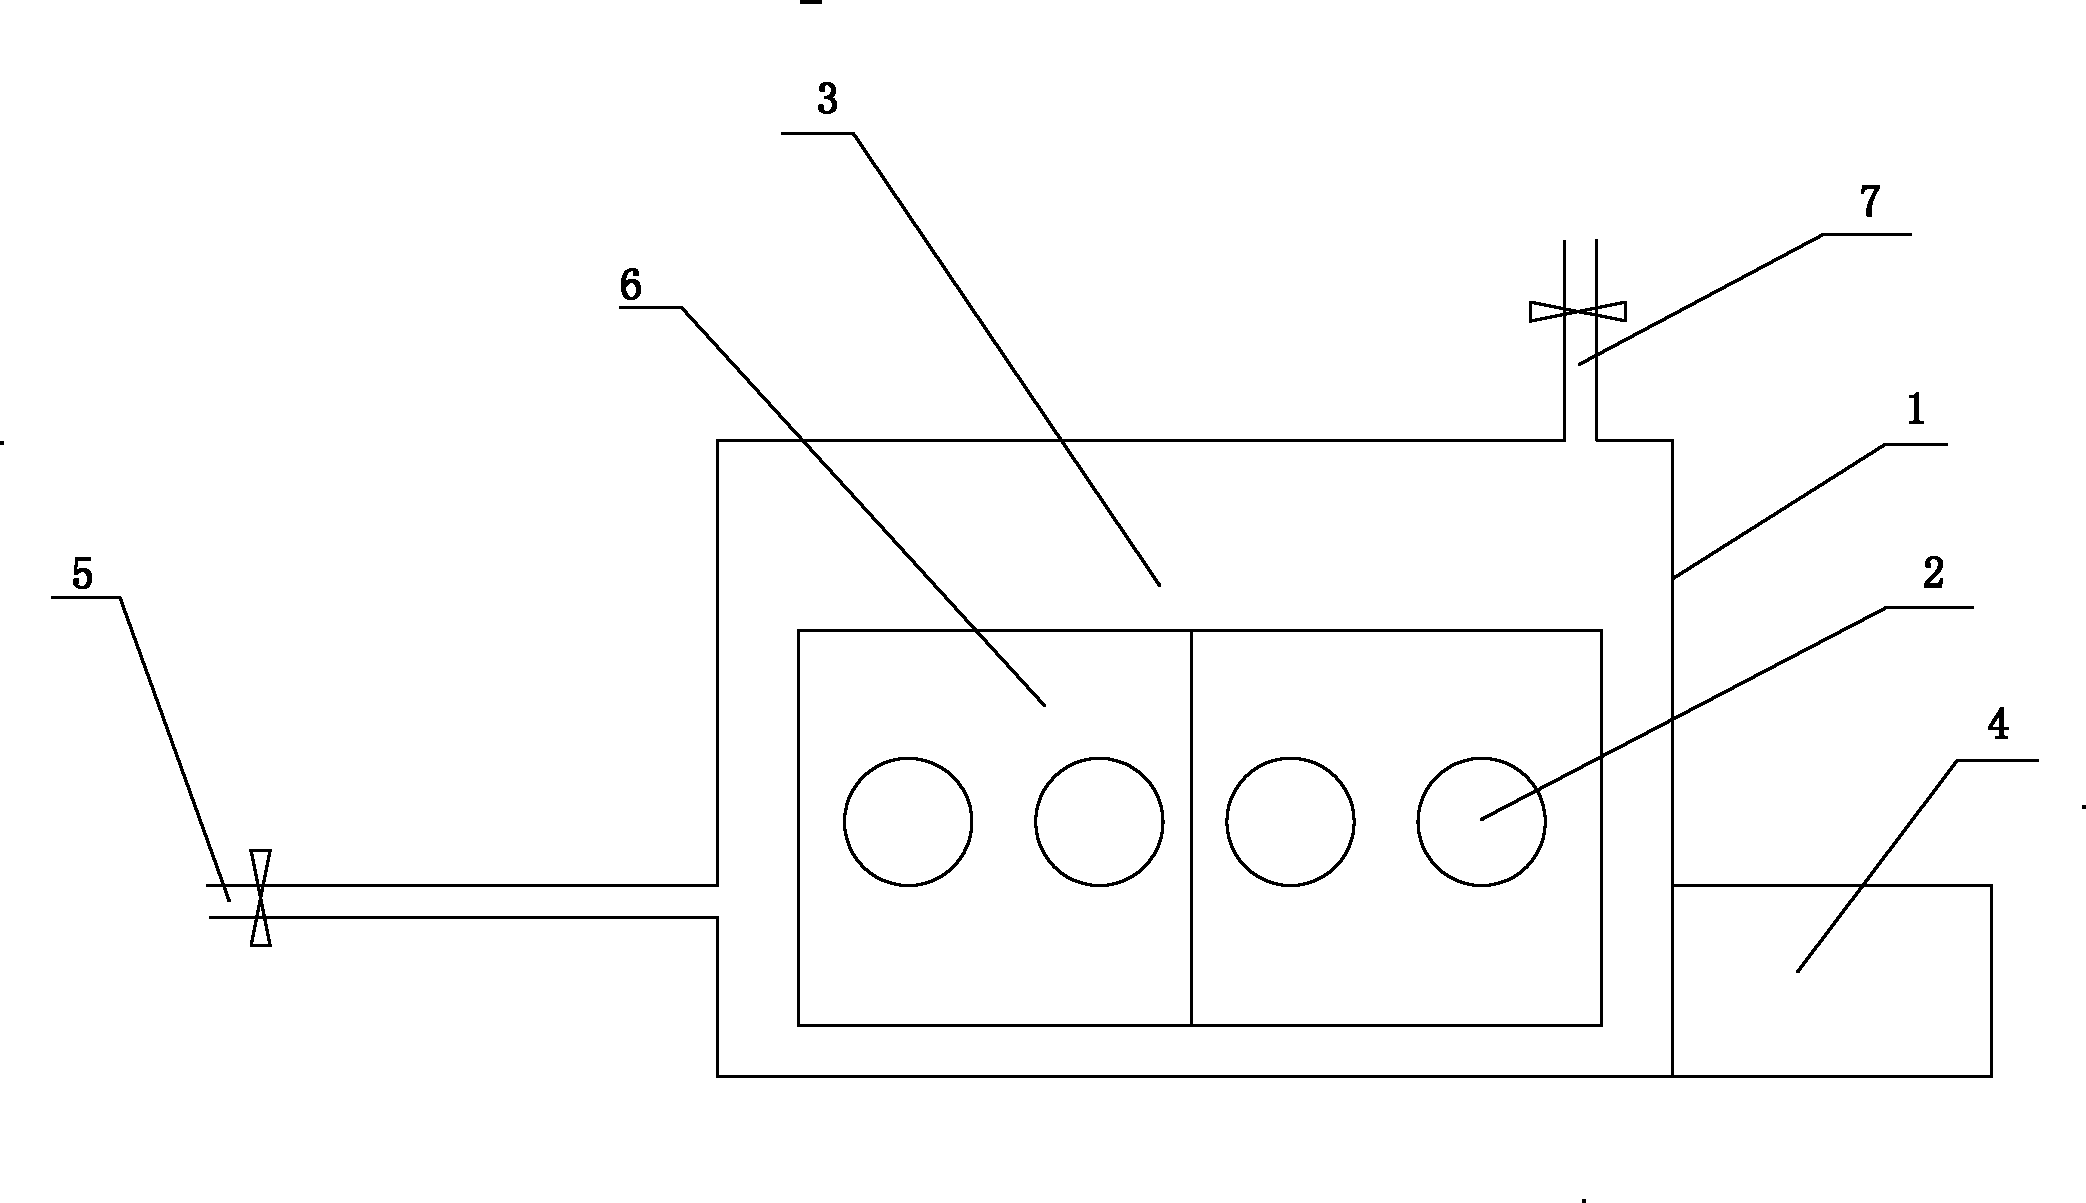 Method for measuring content of ferrous iron and ferric iron in ferrous phosphate lithium anode material